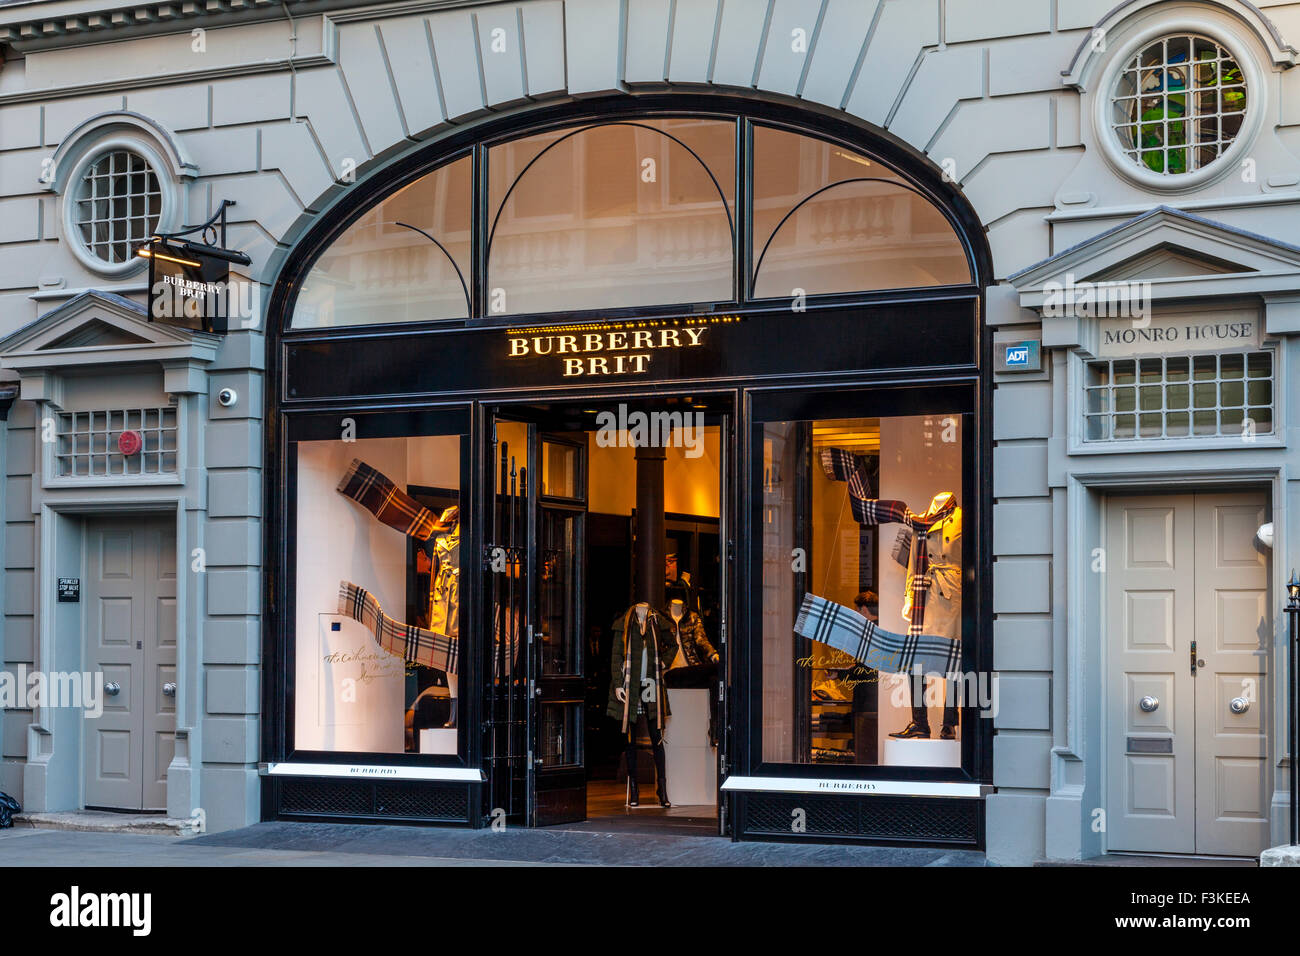 The Burberry Brit Store, Covent Garden, London, UK Stock Photo, Royalty Free Image: 88324274 - Alamy